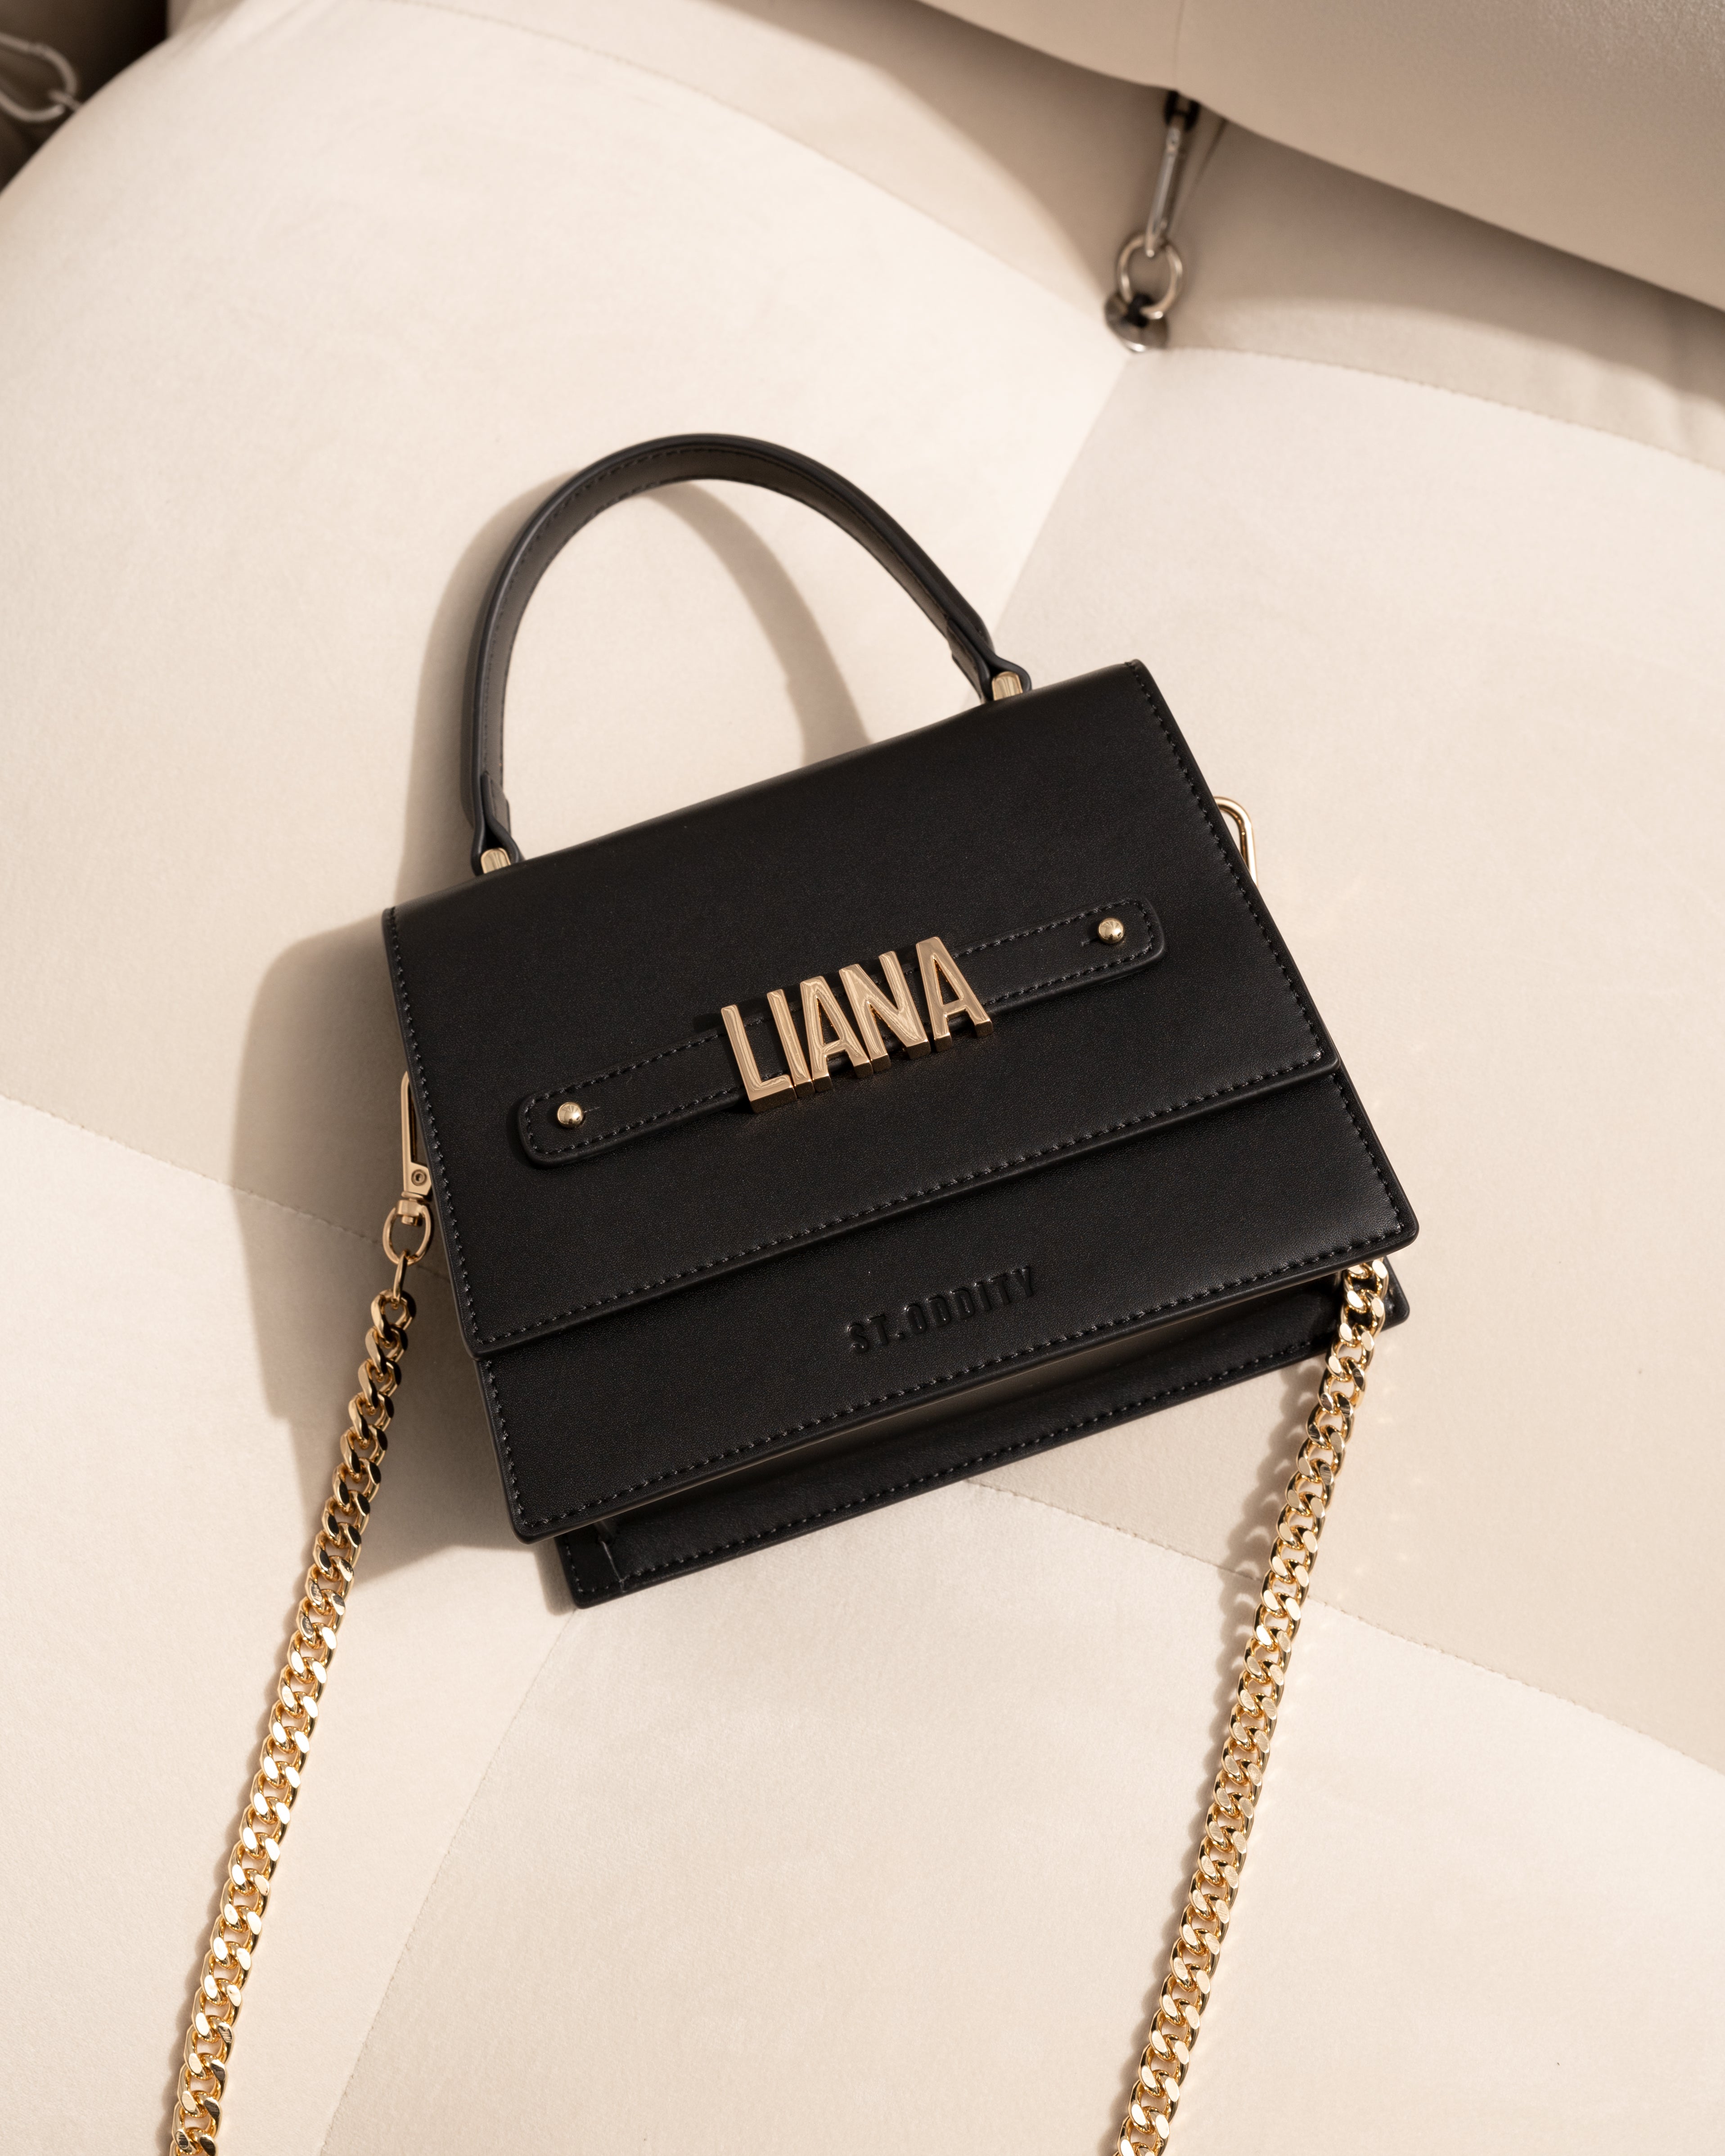 Evening Bag in Black/Gold with Personalised Hardware